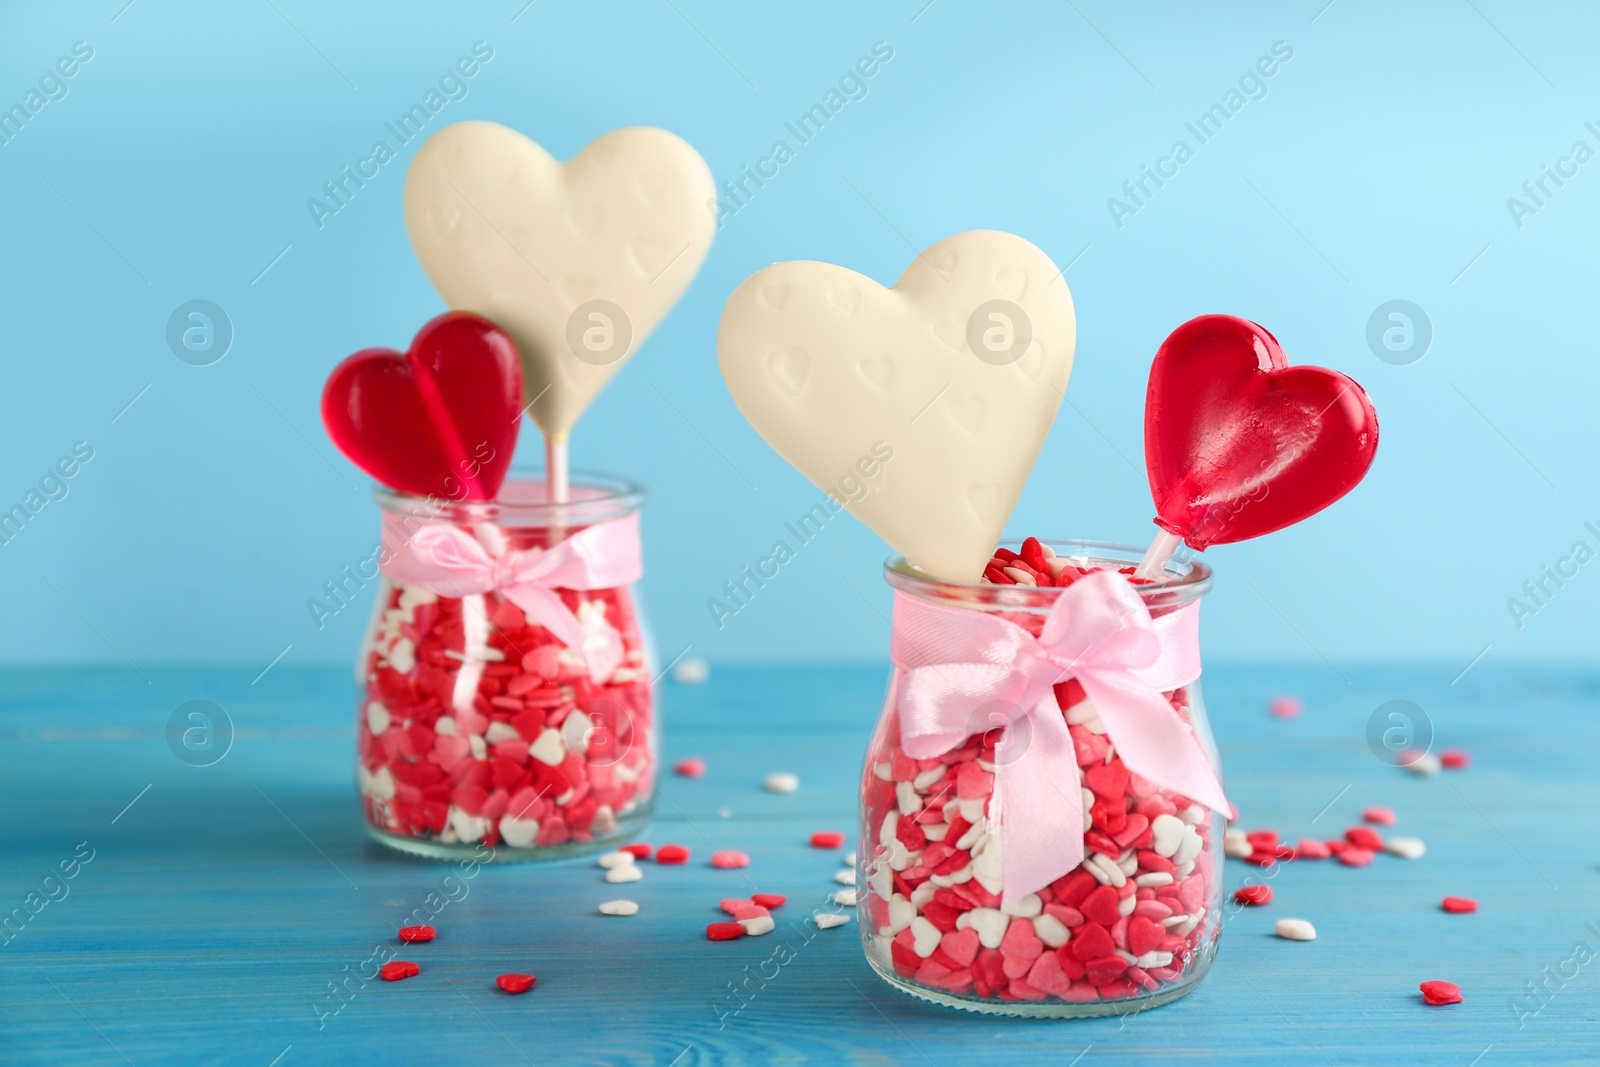 Photo of Heart shaped lollipops made of chocolate and sugar syrup with sprinkles on light blue background